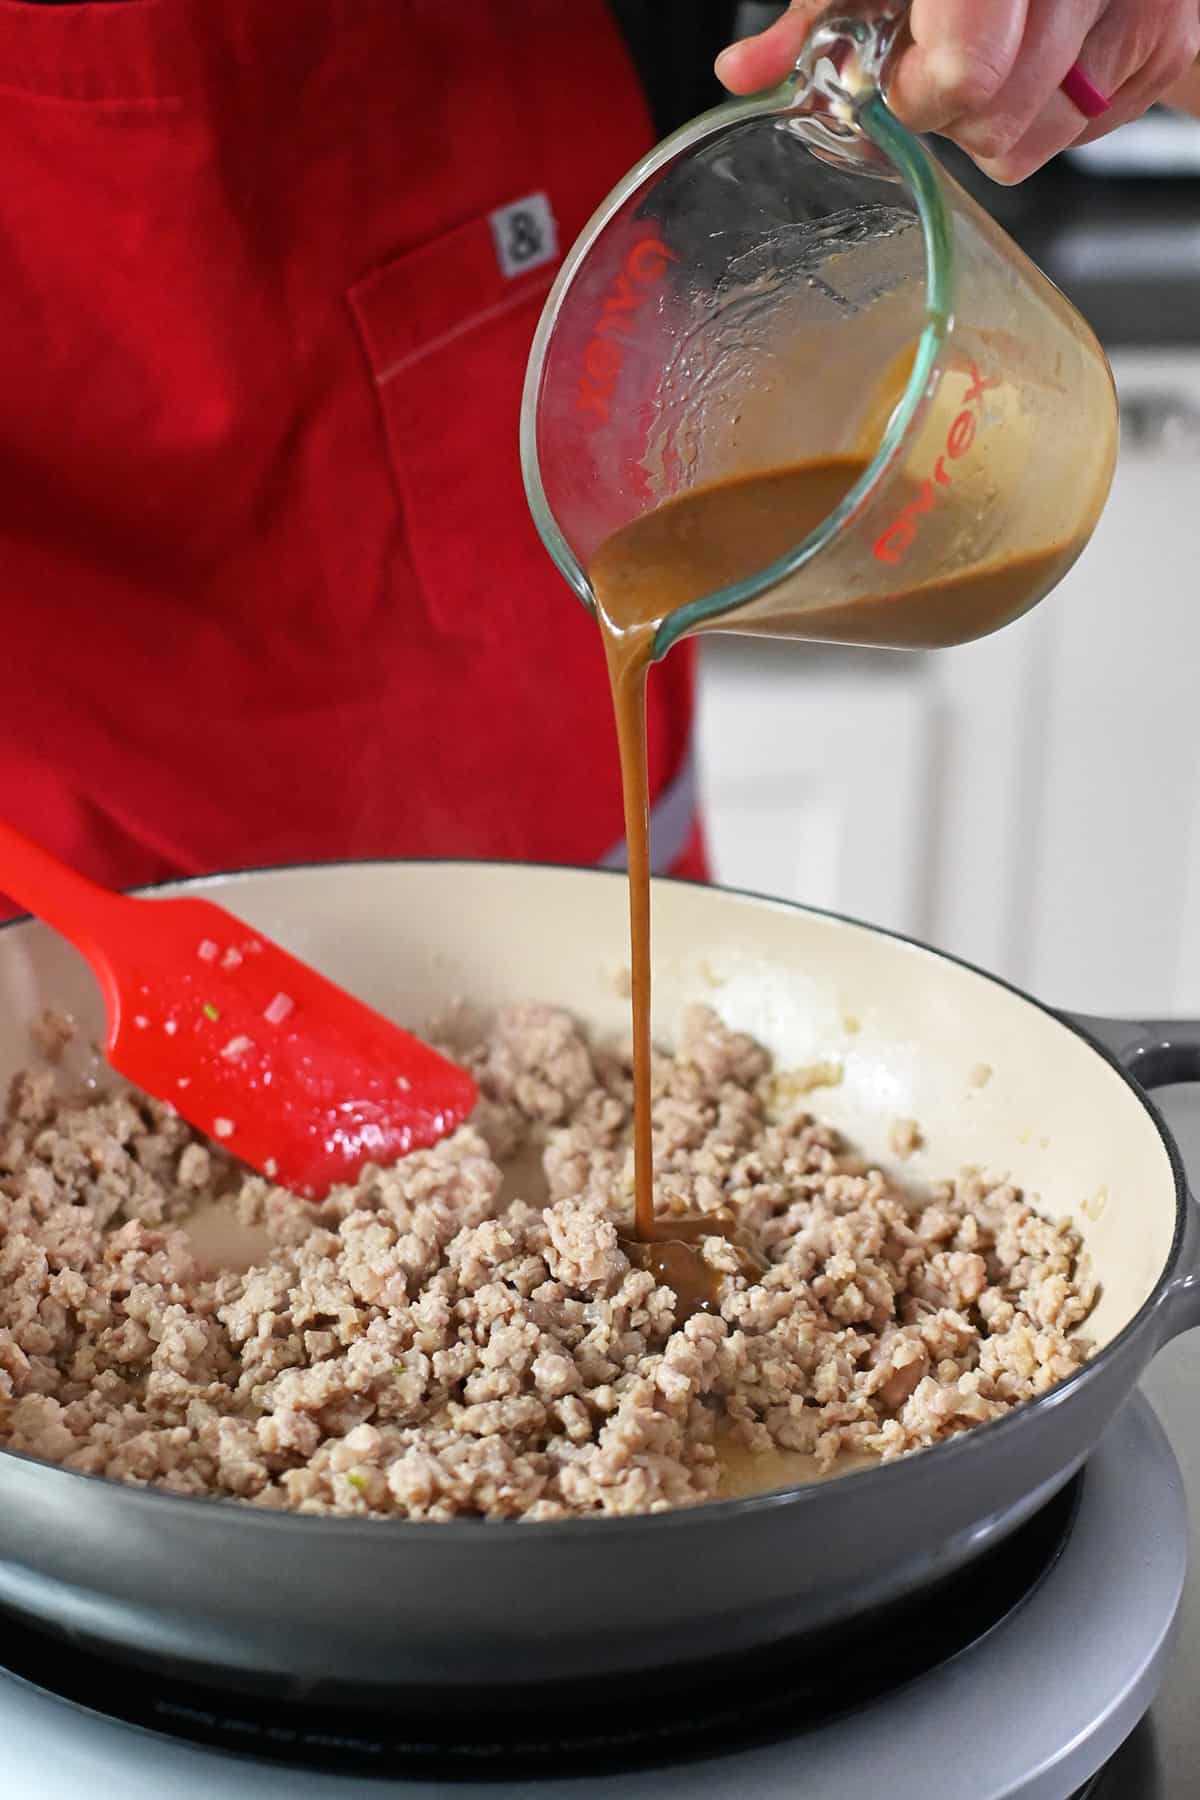 Pouring a brown sauce from a measuring cup into a skillet with cooked ground chicken.